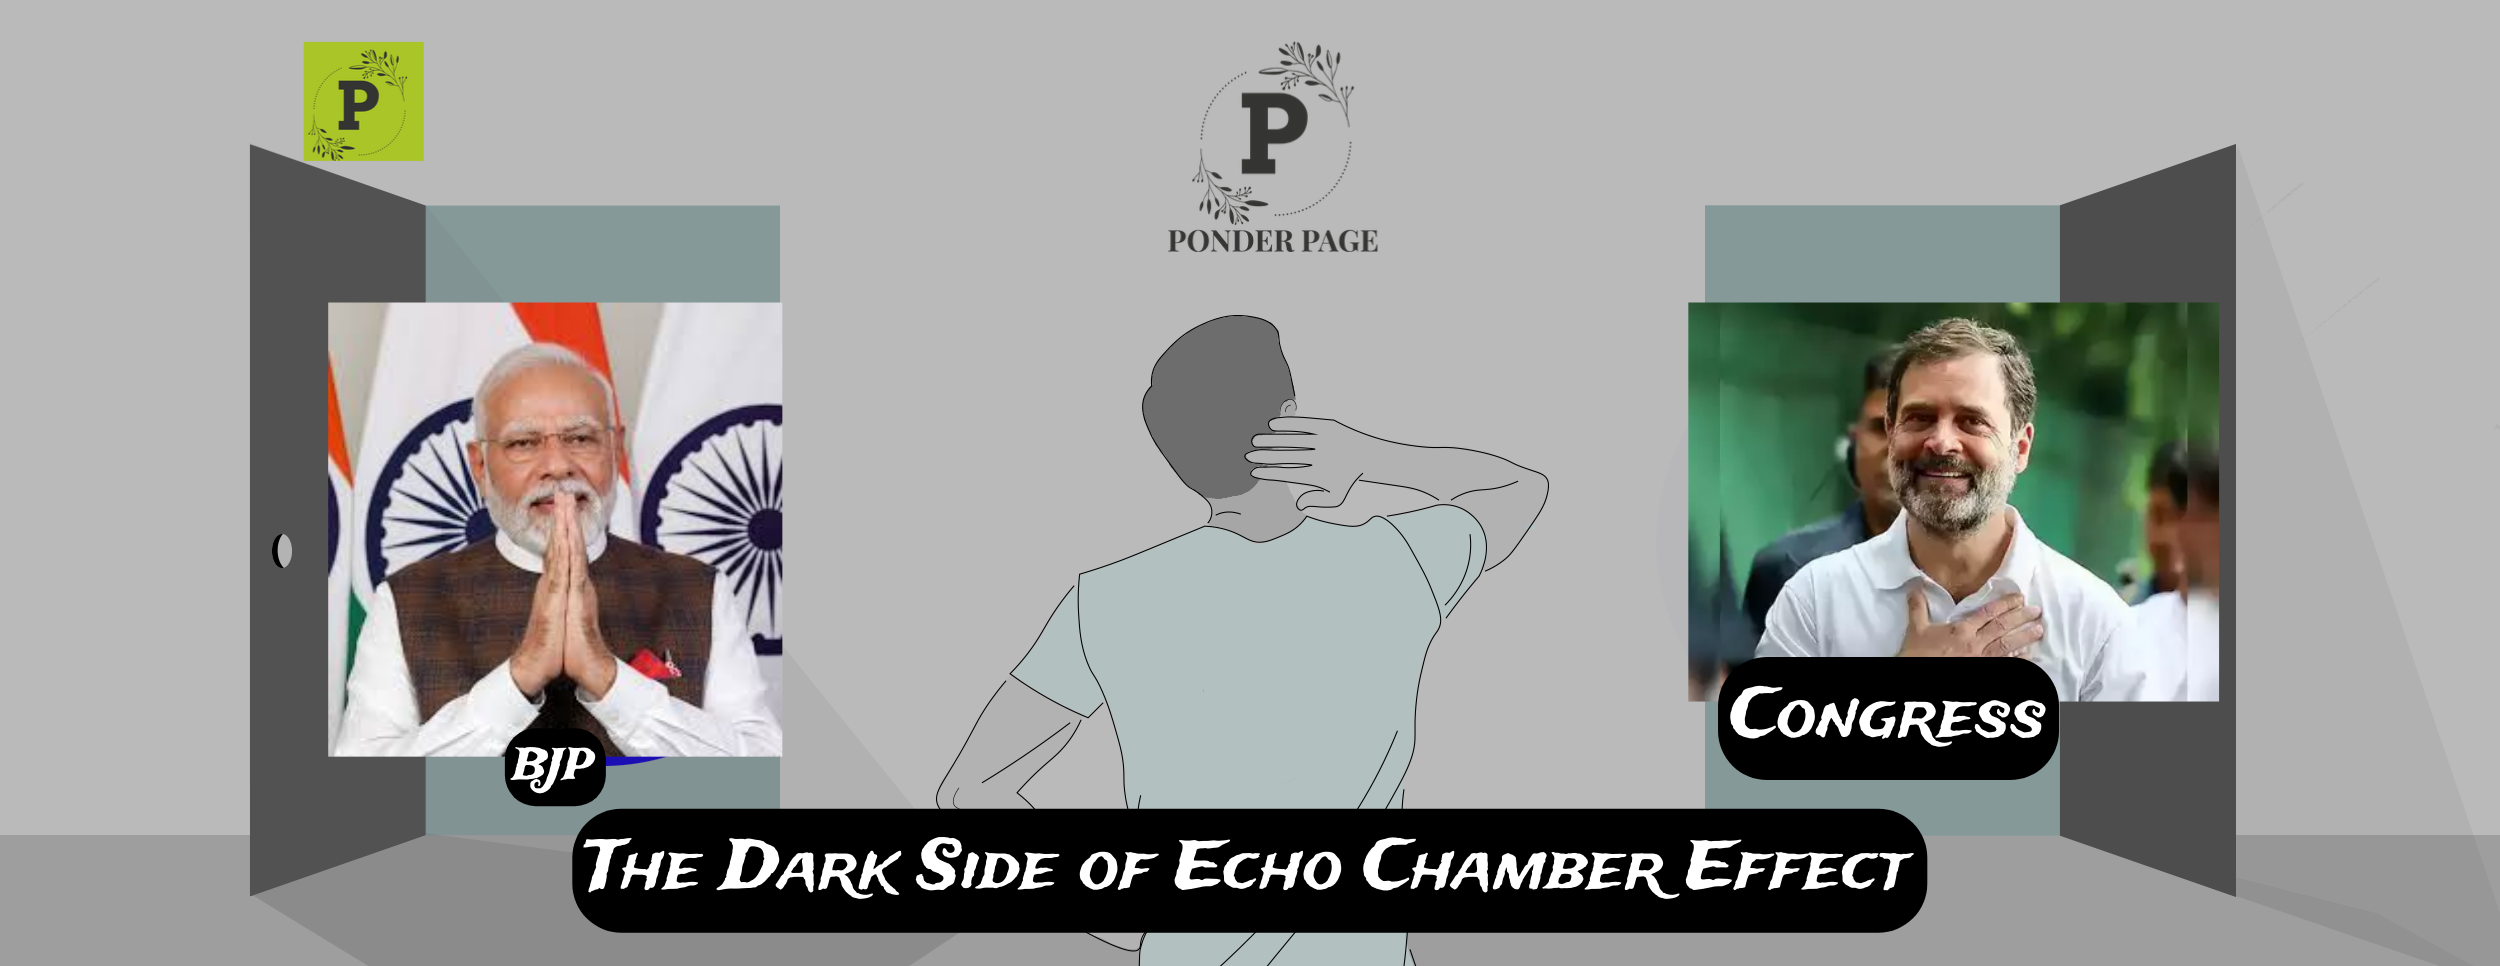 The Dark Side of Echo Chamber Effect: Understanding Its Impact on Society and Its Causes, Consequences, and Potential Ways to Mitigate the Impact